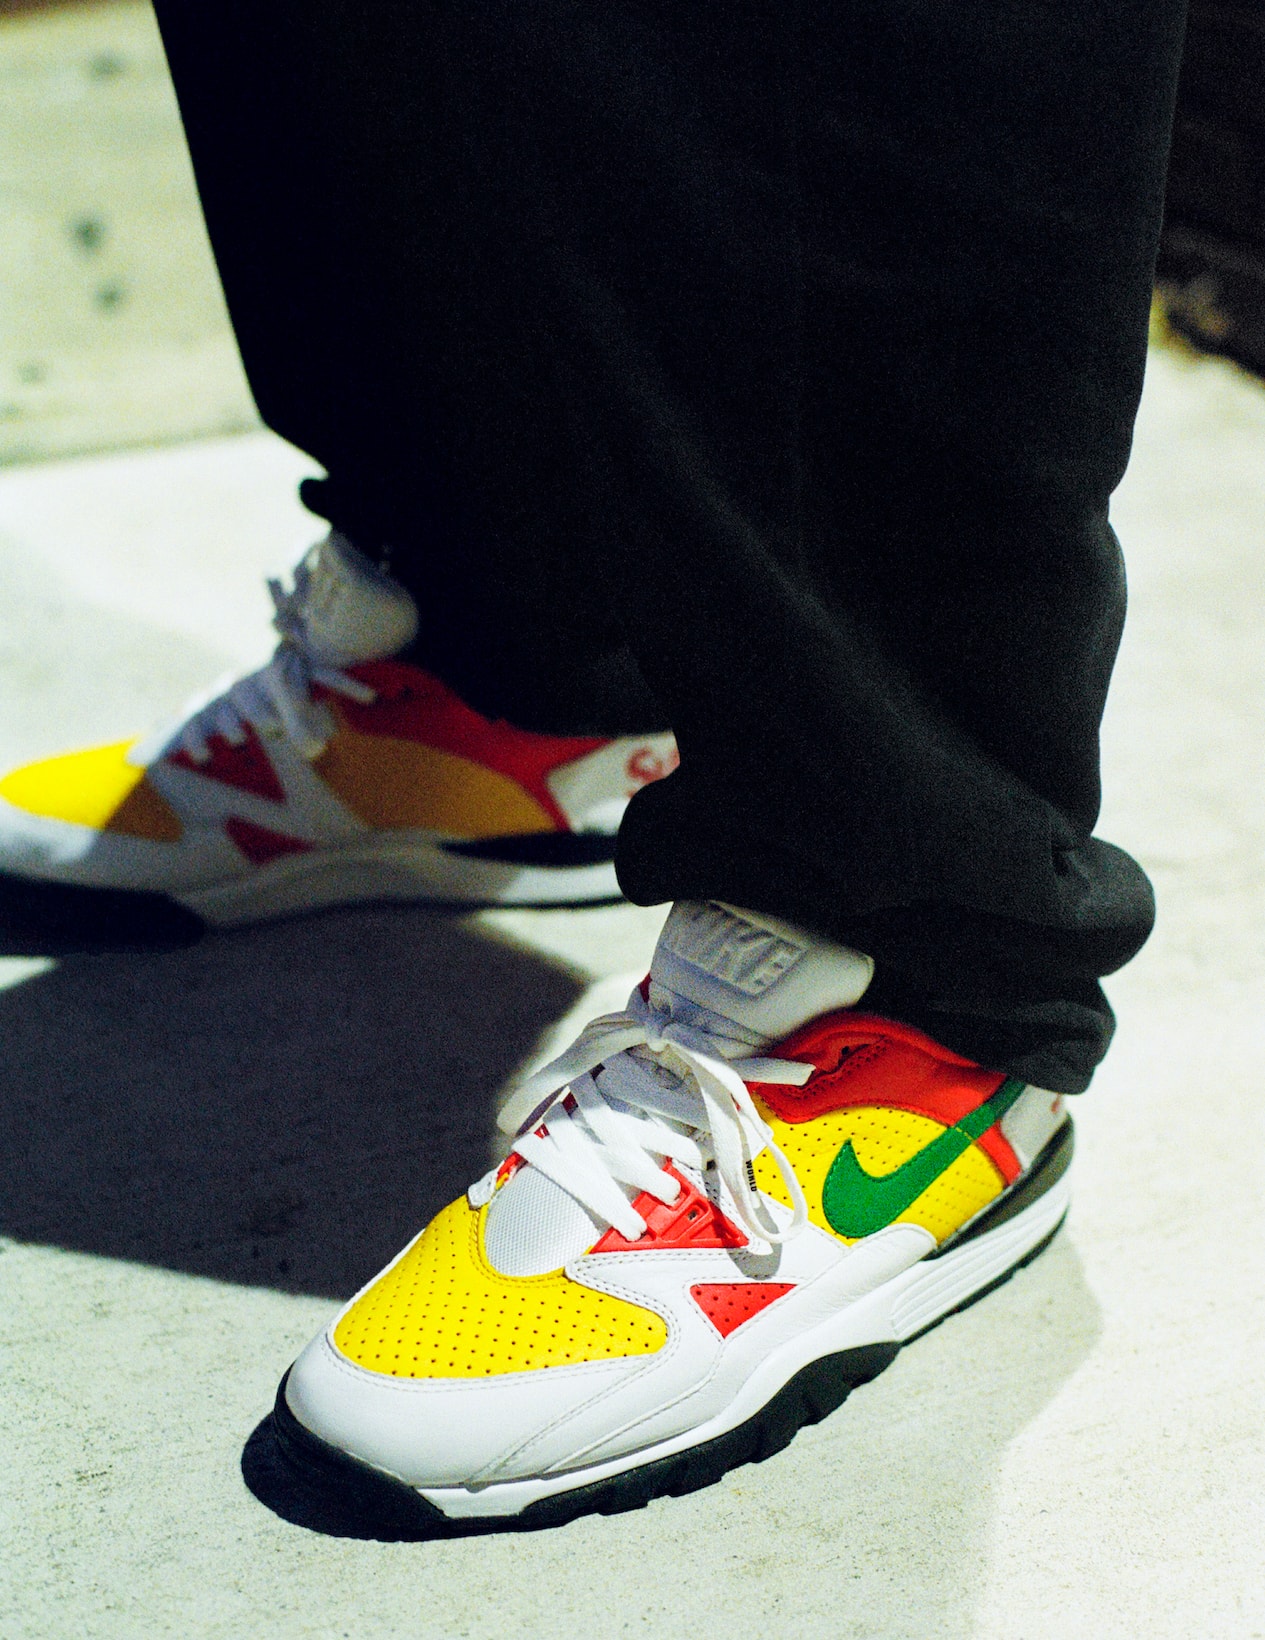 Supreme Nike Cross Trainer Low Sneakers Footwear Shoes Kicks Collaboration Black Red White Yellow Green